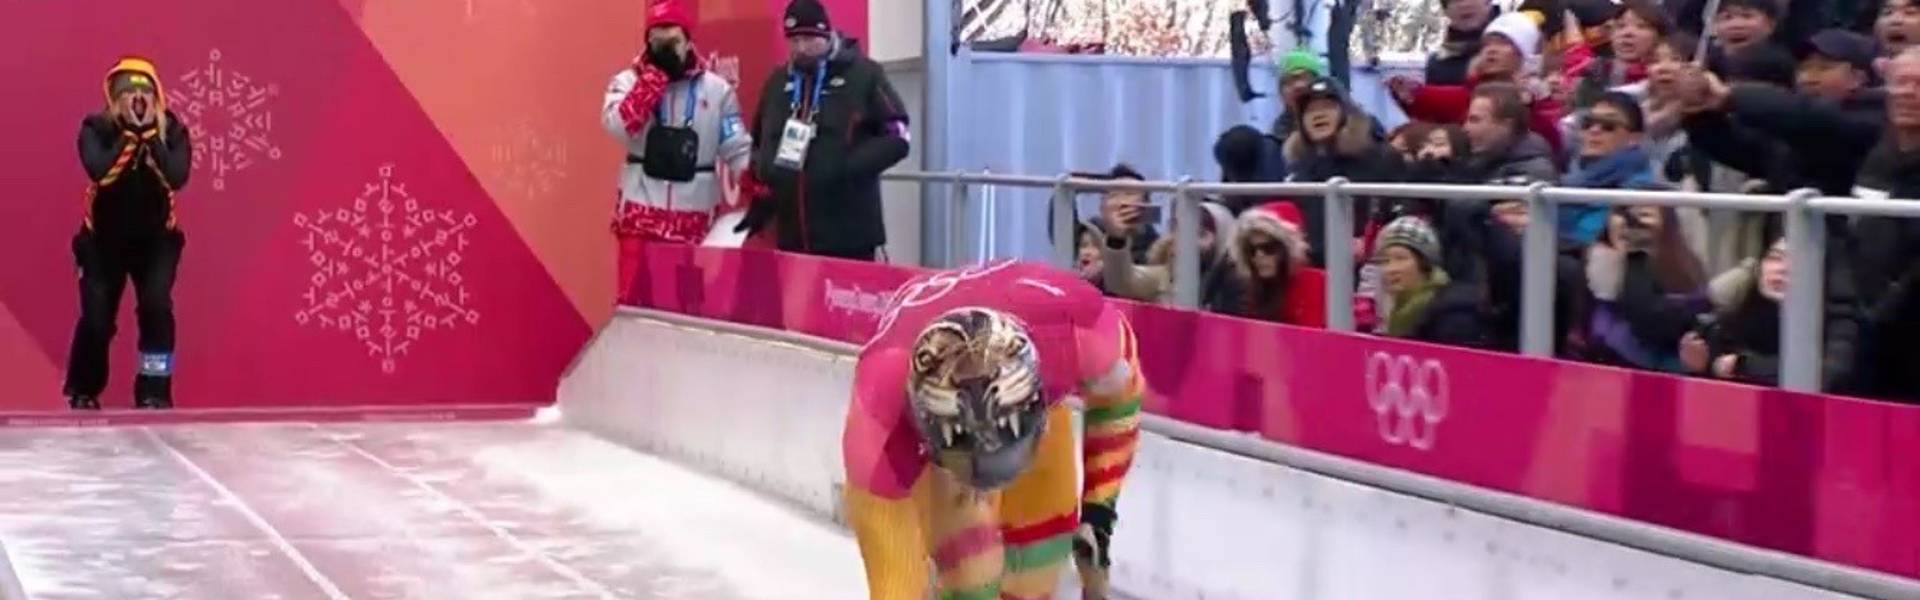 Blugold Lauri Miller Bausch coaches Ghana’s Akwasi Frimpong as he begins a skeleton race during the 2018 Winter Olympics.